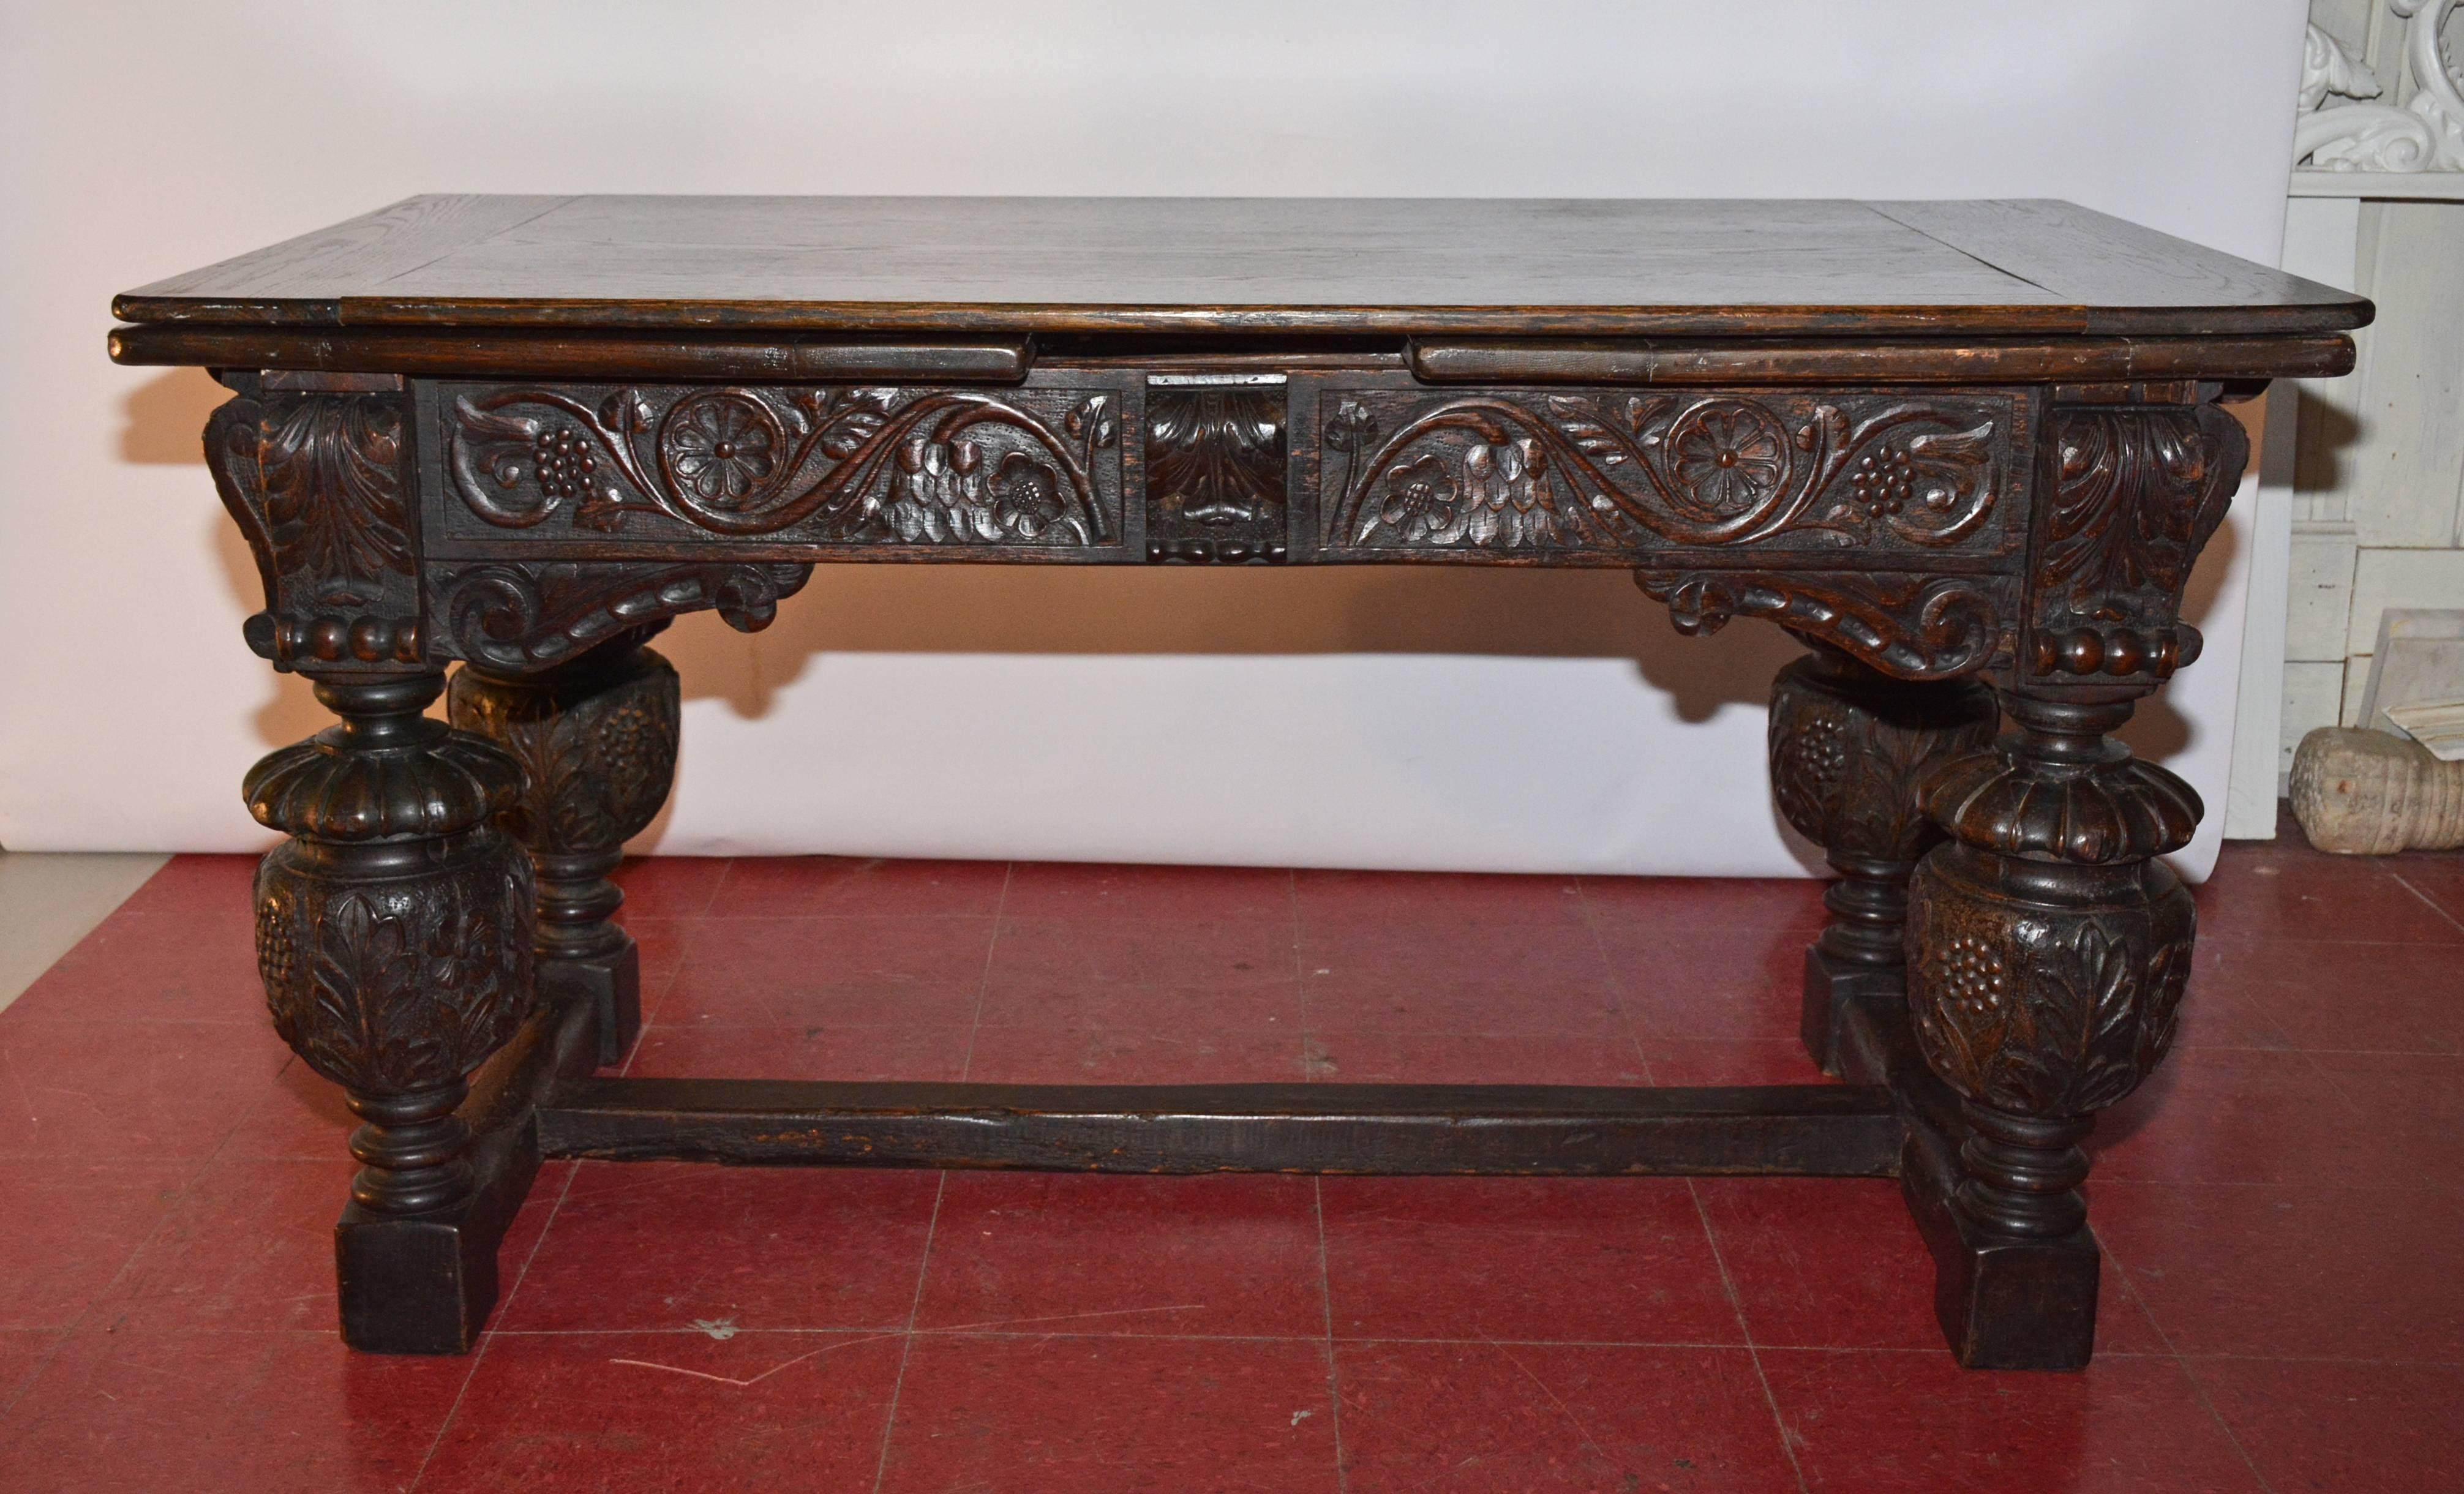 The Elizabethan/ Jacobean style dining table has hand-carved decorations of grapes, flowers, leaves and rosettes. The table extends to double its closed size which is 57